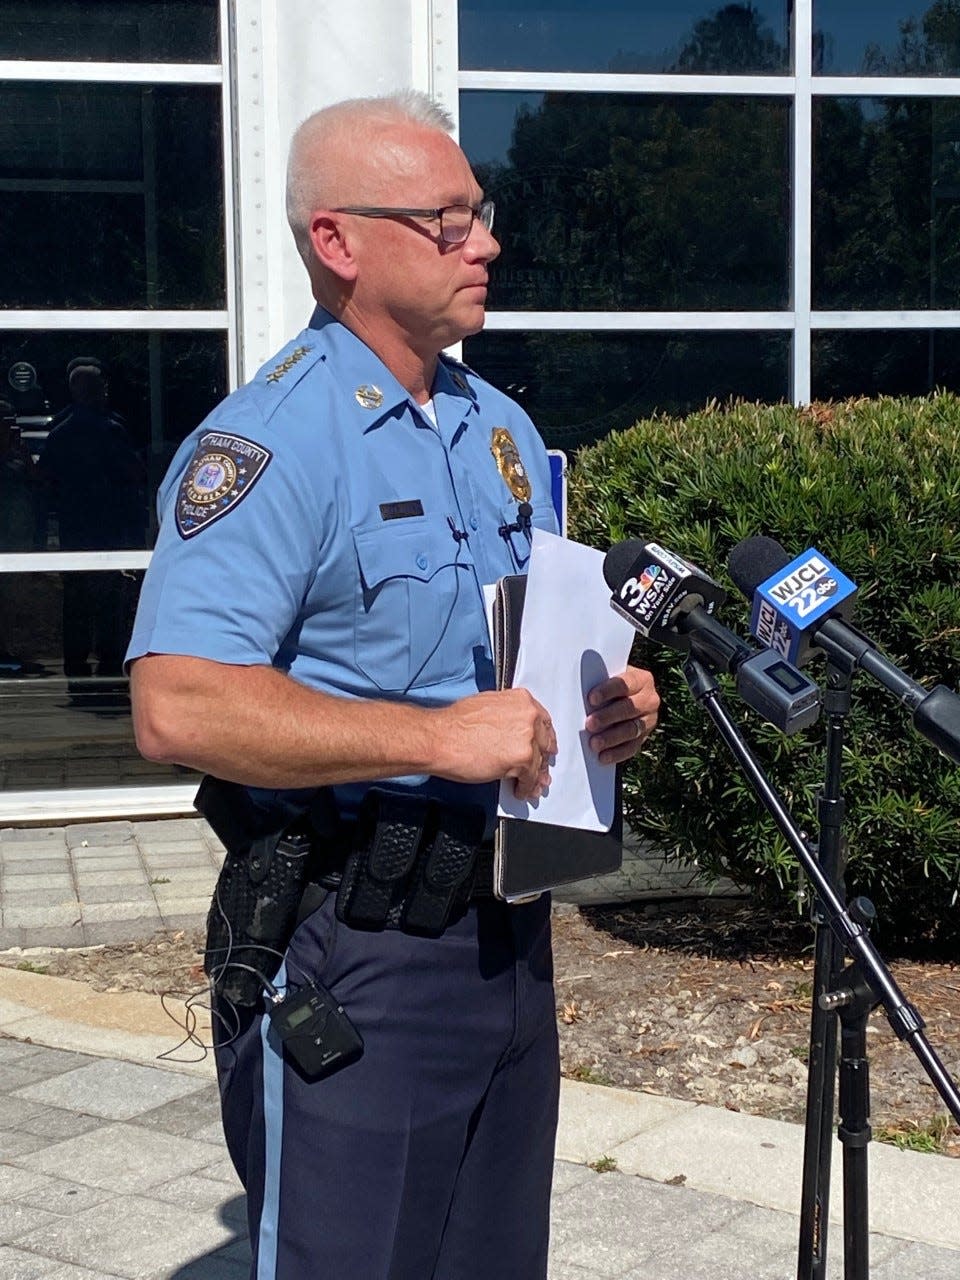 Chatham County Police Chief Jeff Hadley gives an update on the search for missing 20-month-old, Quinton Simon on Thursday, Oct. 6, in front of Chatham County Police headquarters.